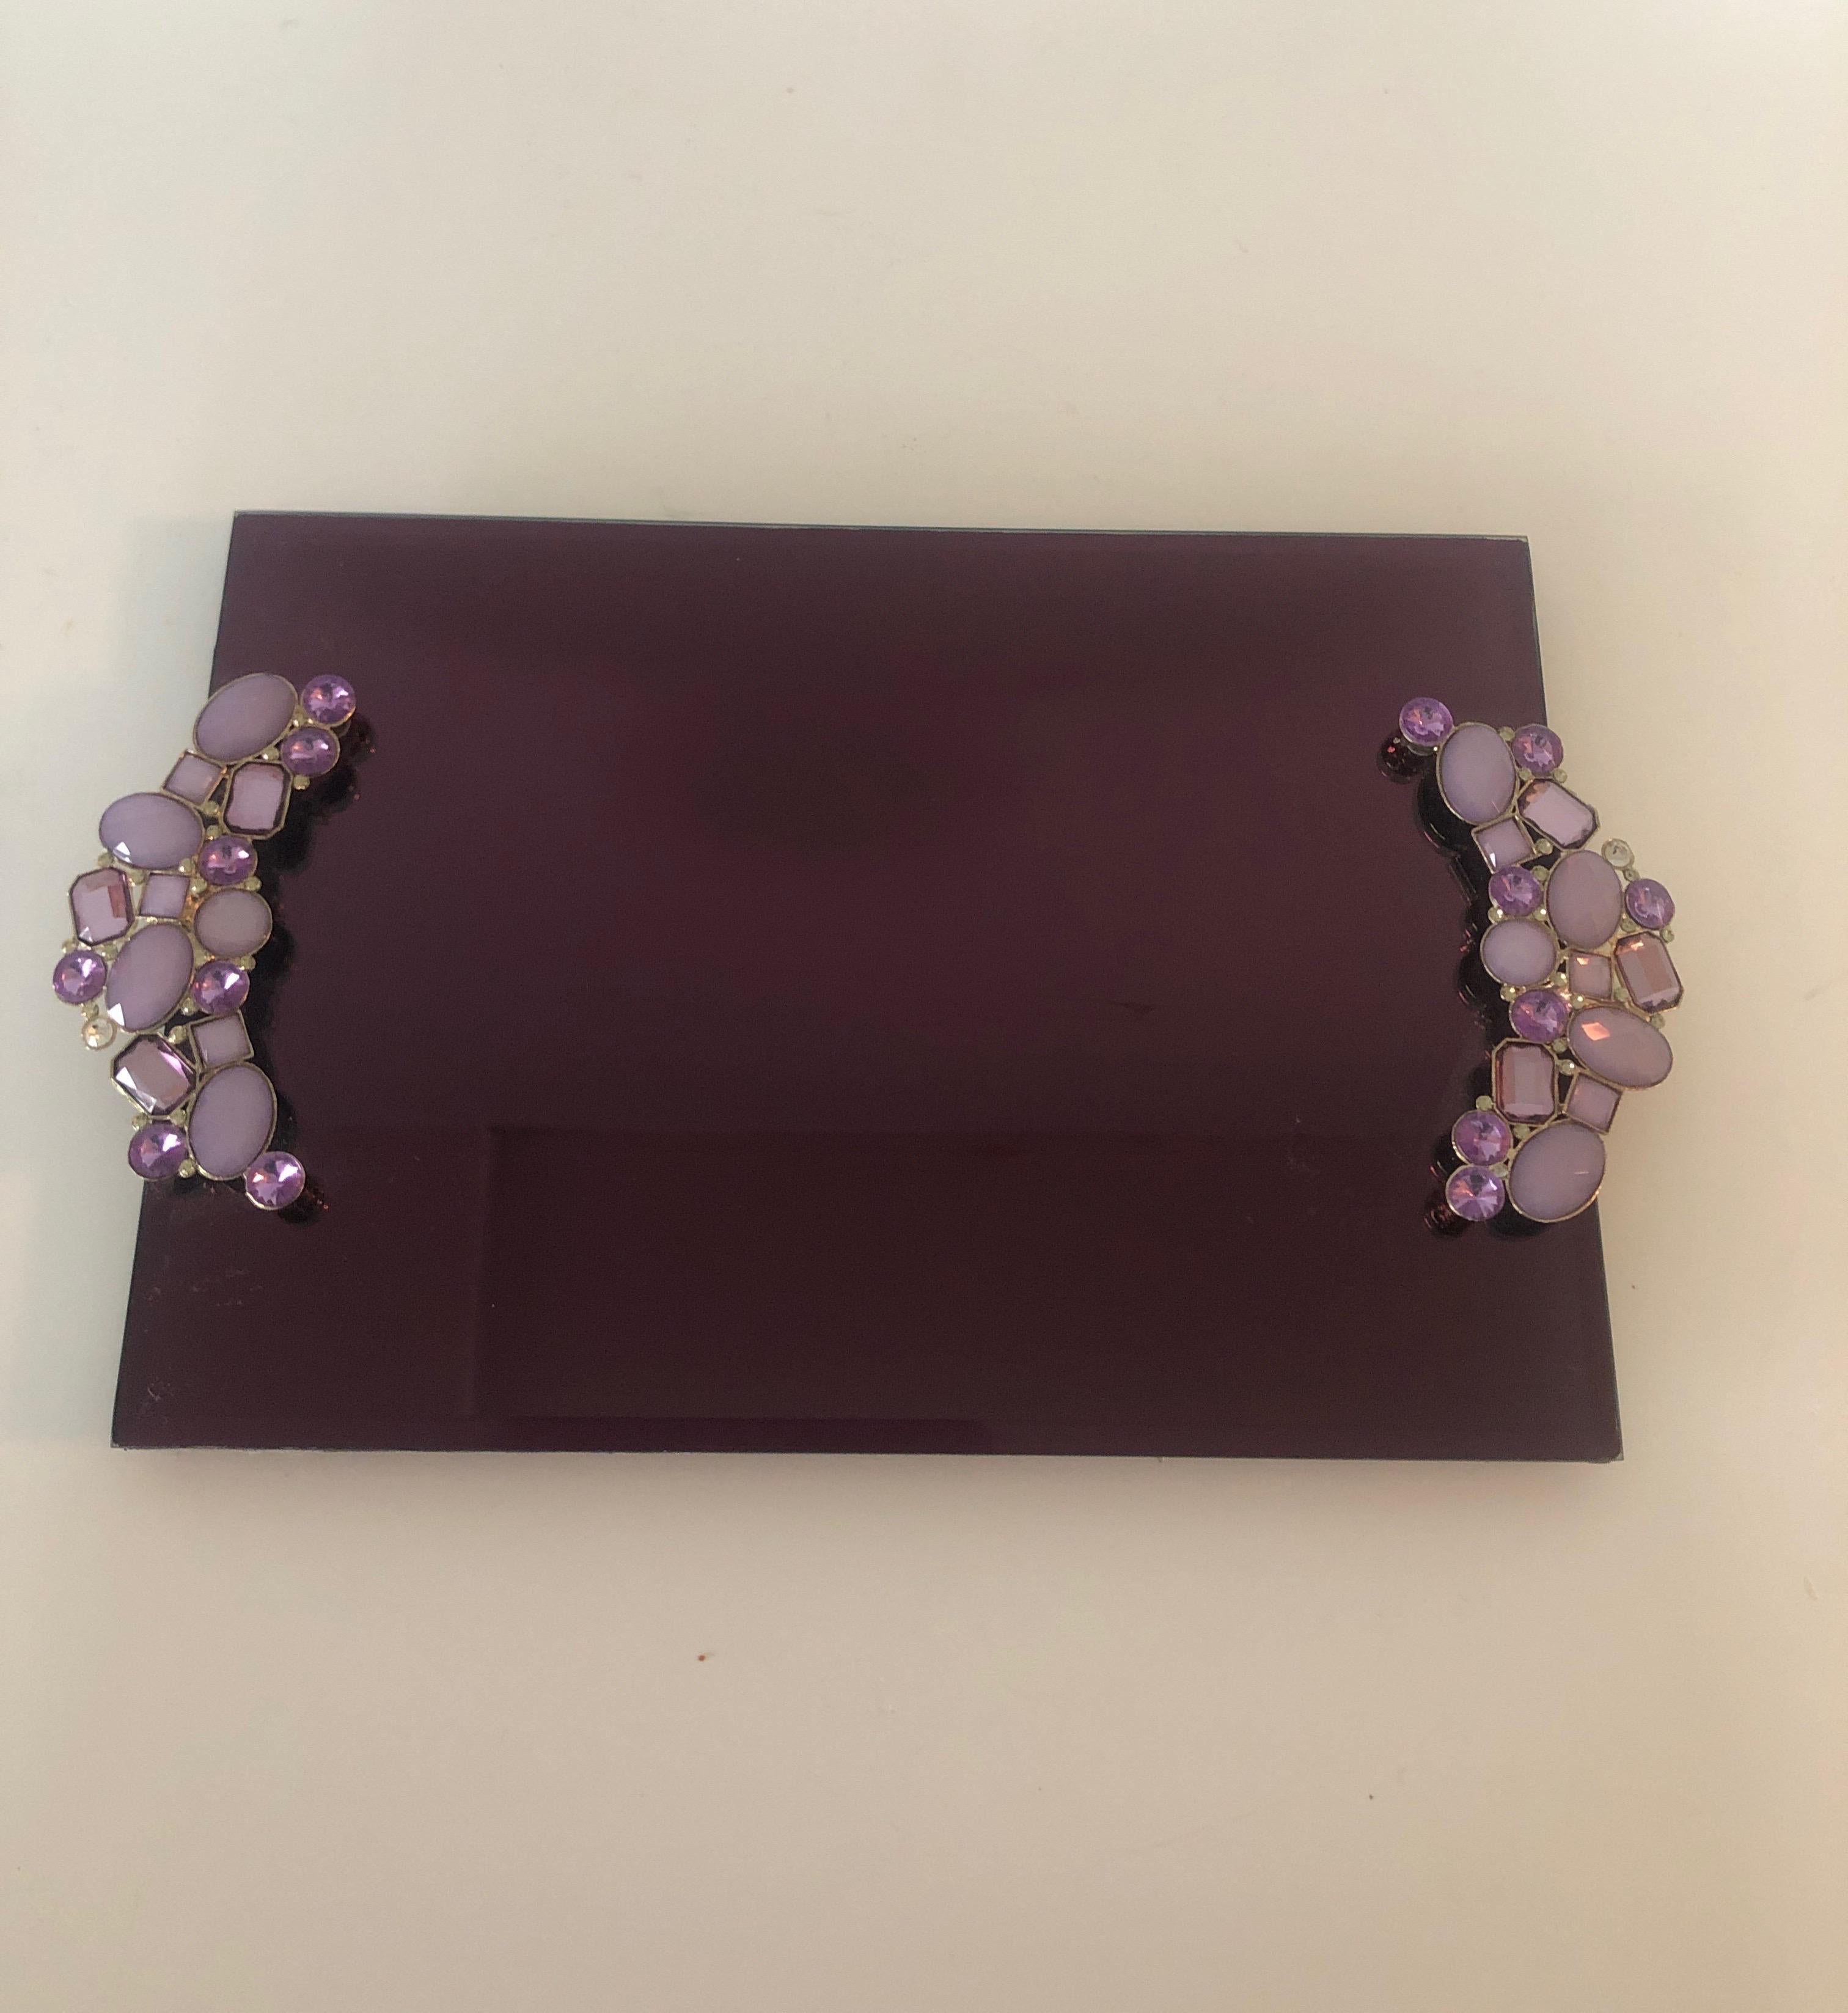 Modern Rectangular Amethyst color glass vanity tray.
Bejeweled handles and beveled edges.
Size: 9